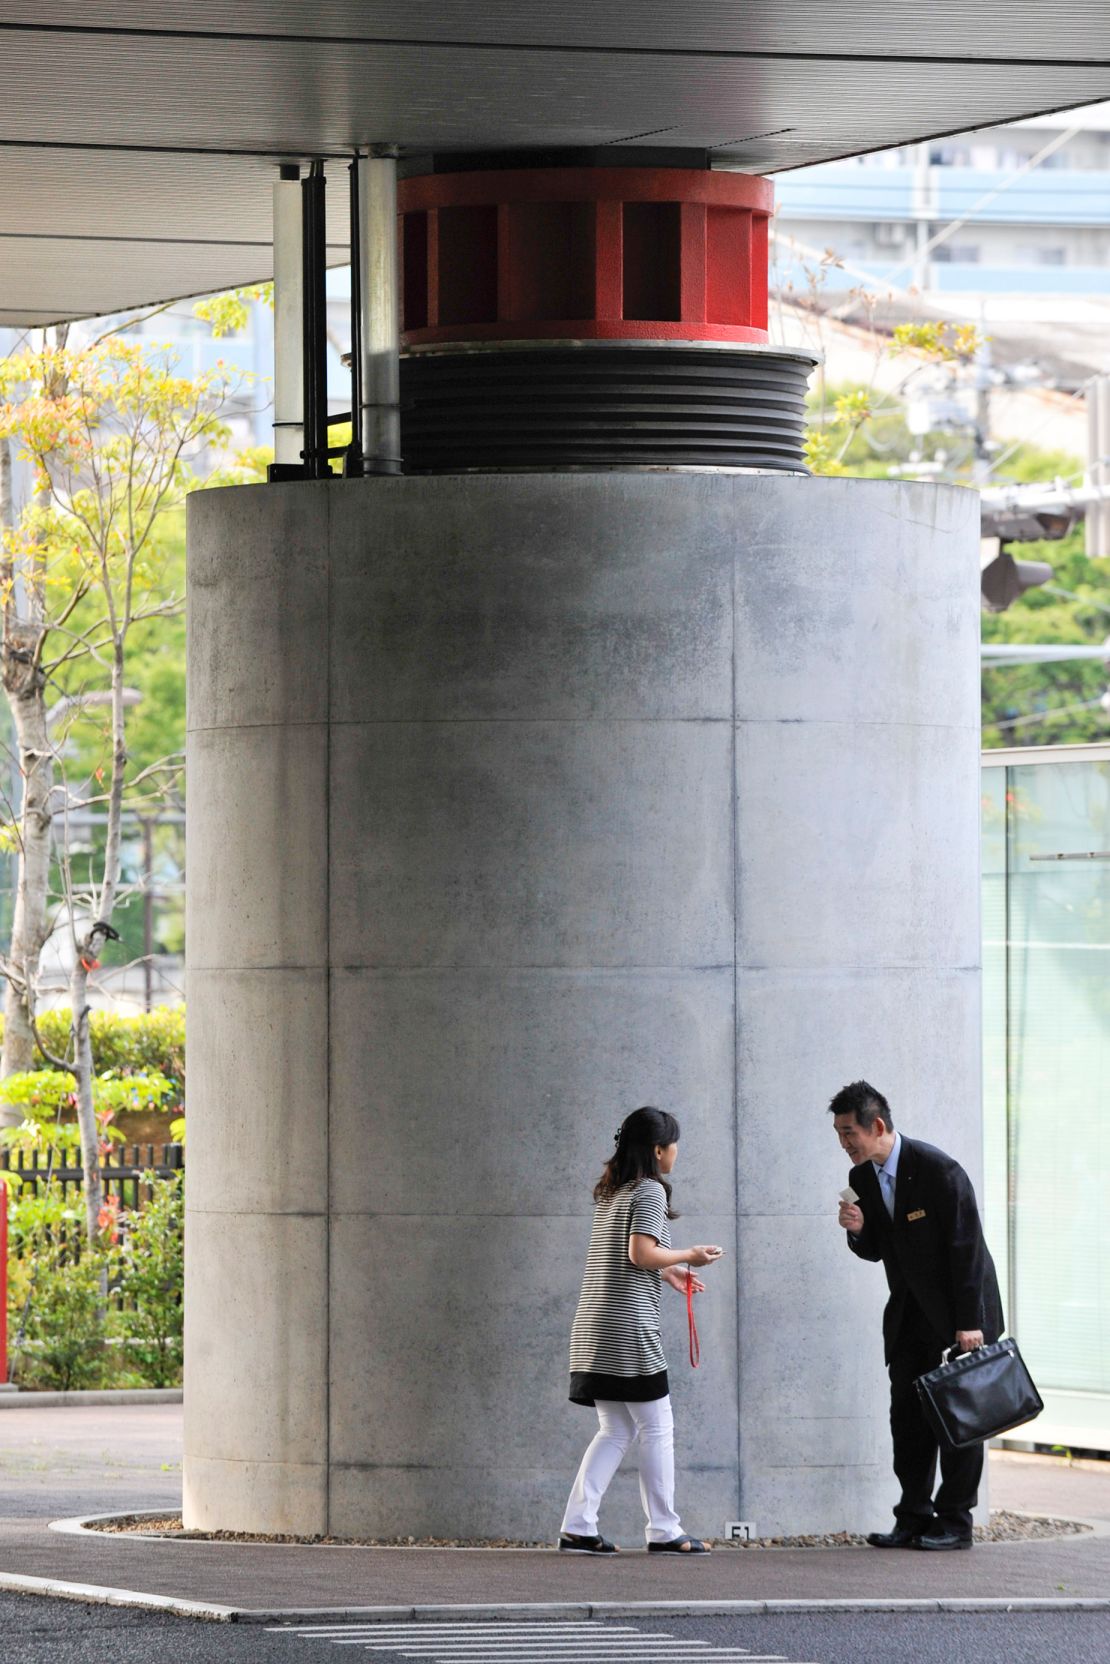 A seismic isolation system on a column-head at the engineering firm Shimizu Corporation's research facility in Tokyo, Japan.